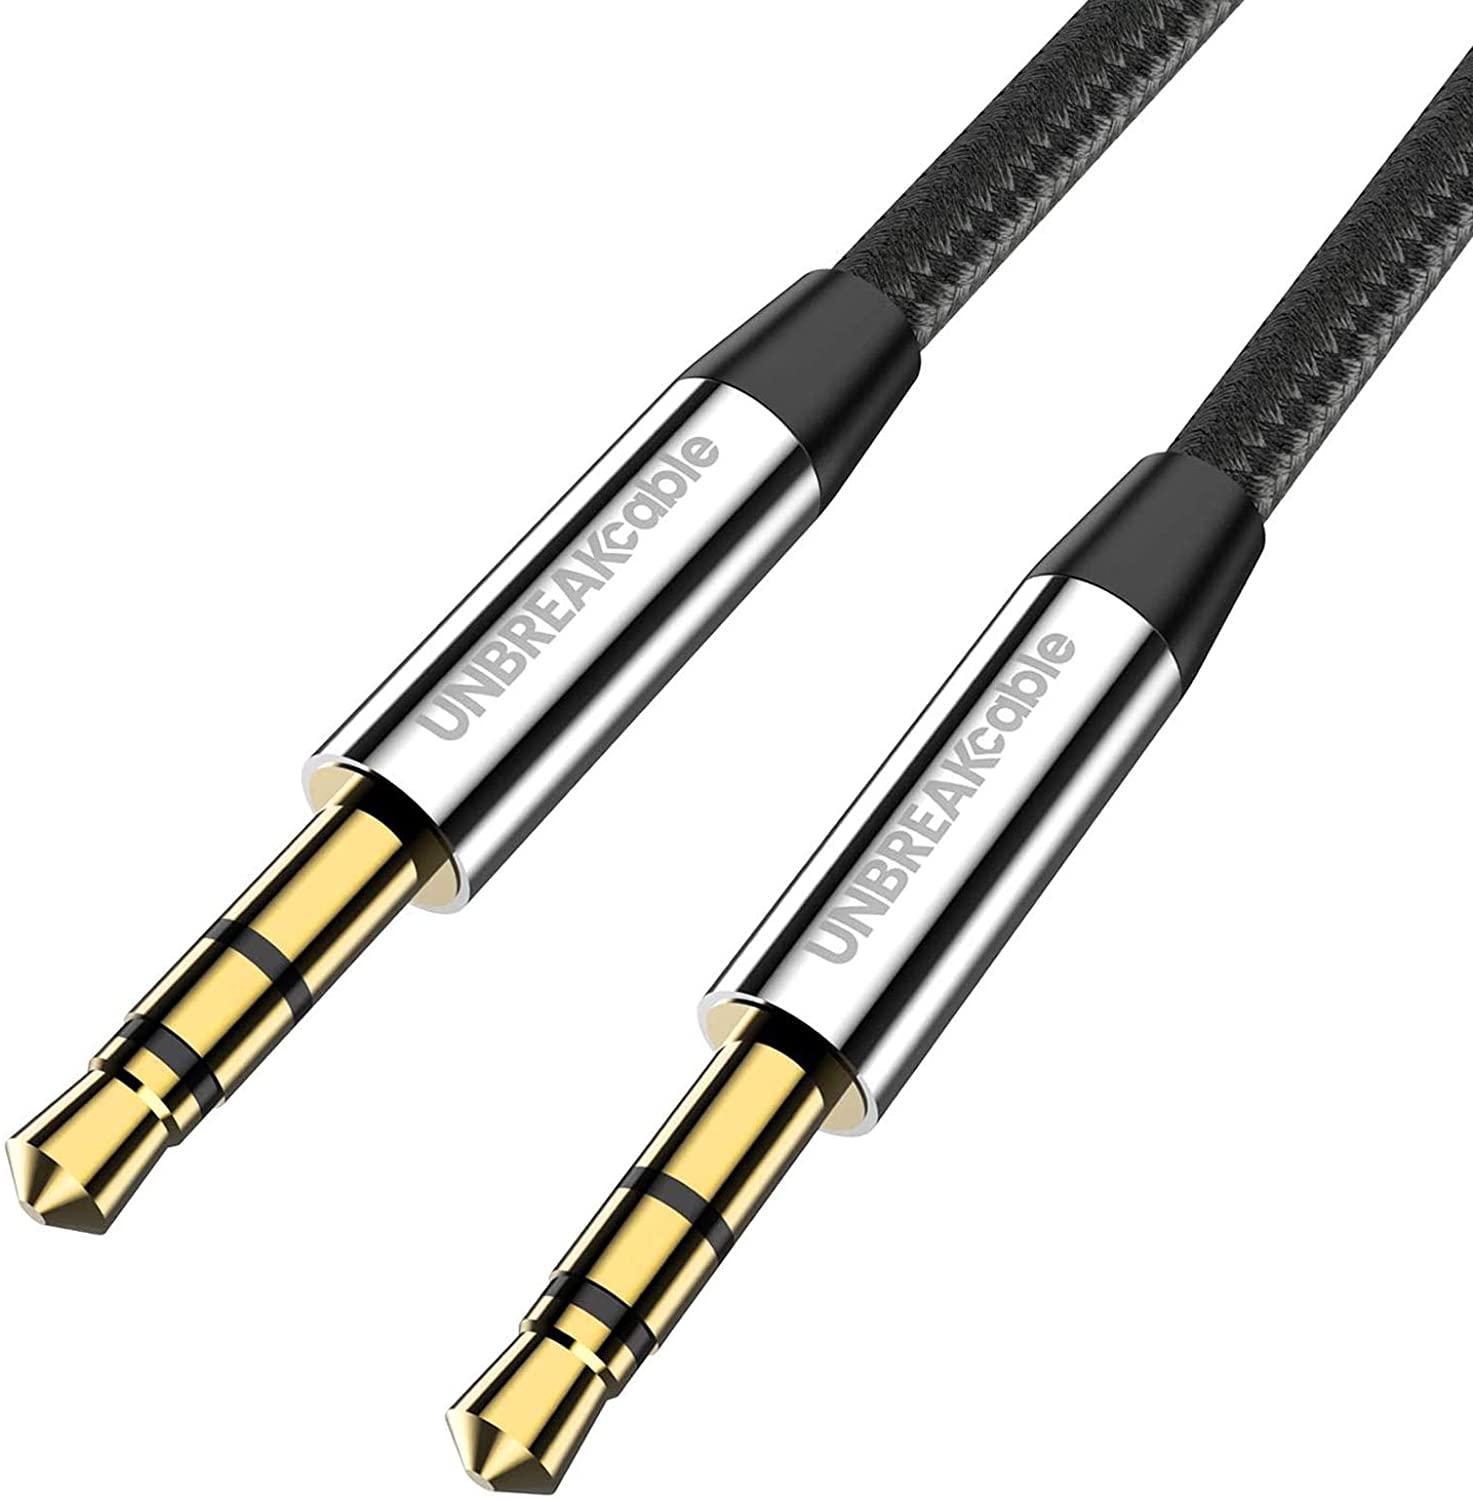 UNBREAKcable Flexible Nylon Braided Auxiliary Audio Cable, 6.6-Foot